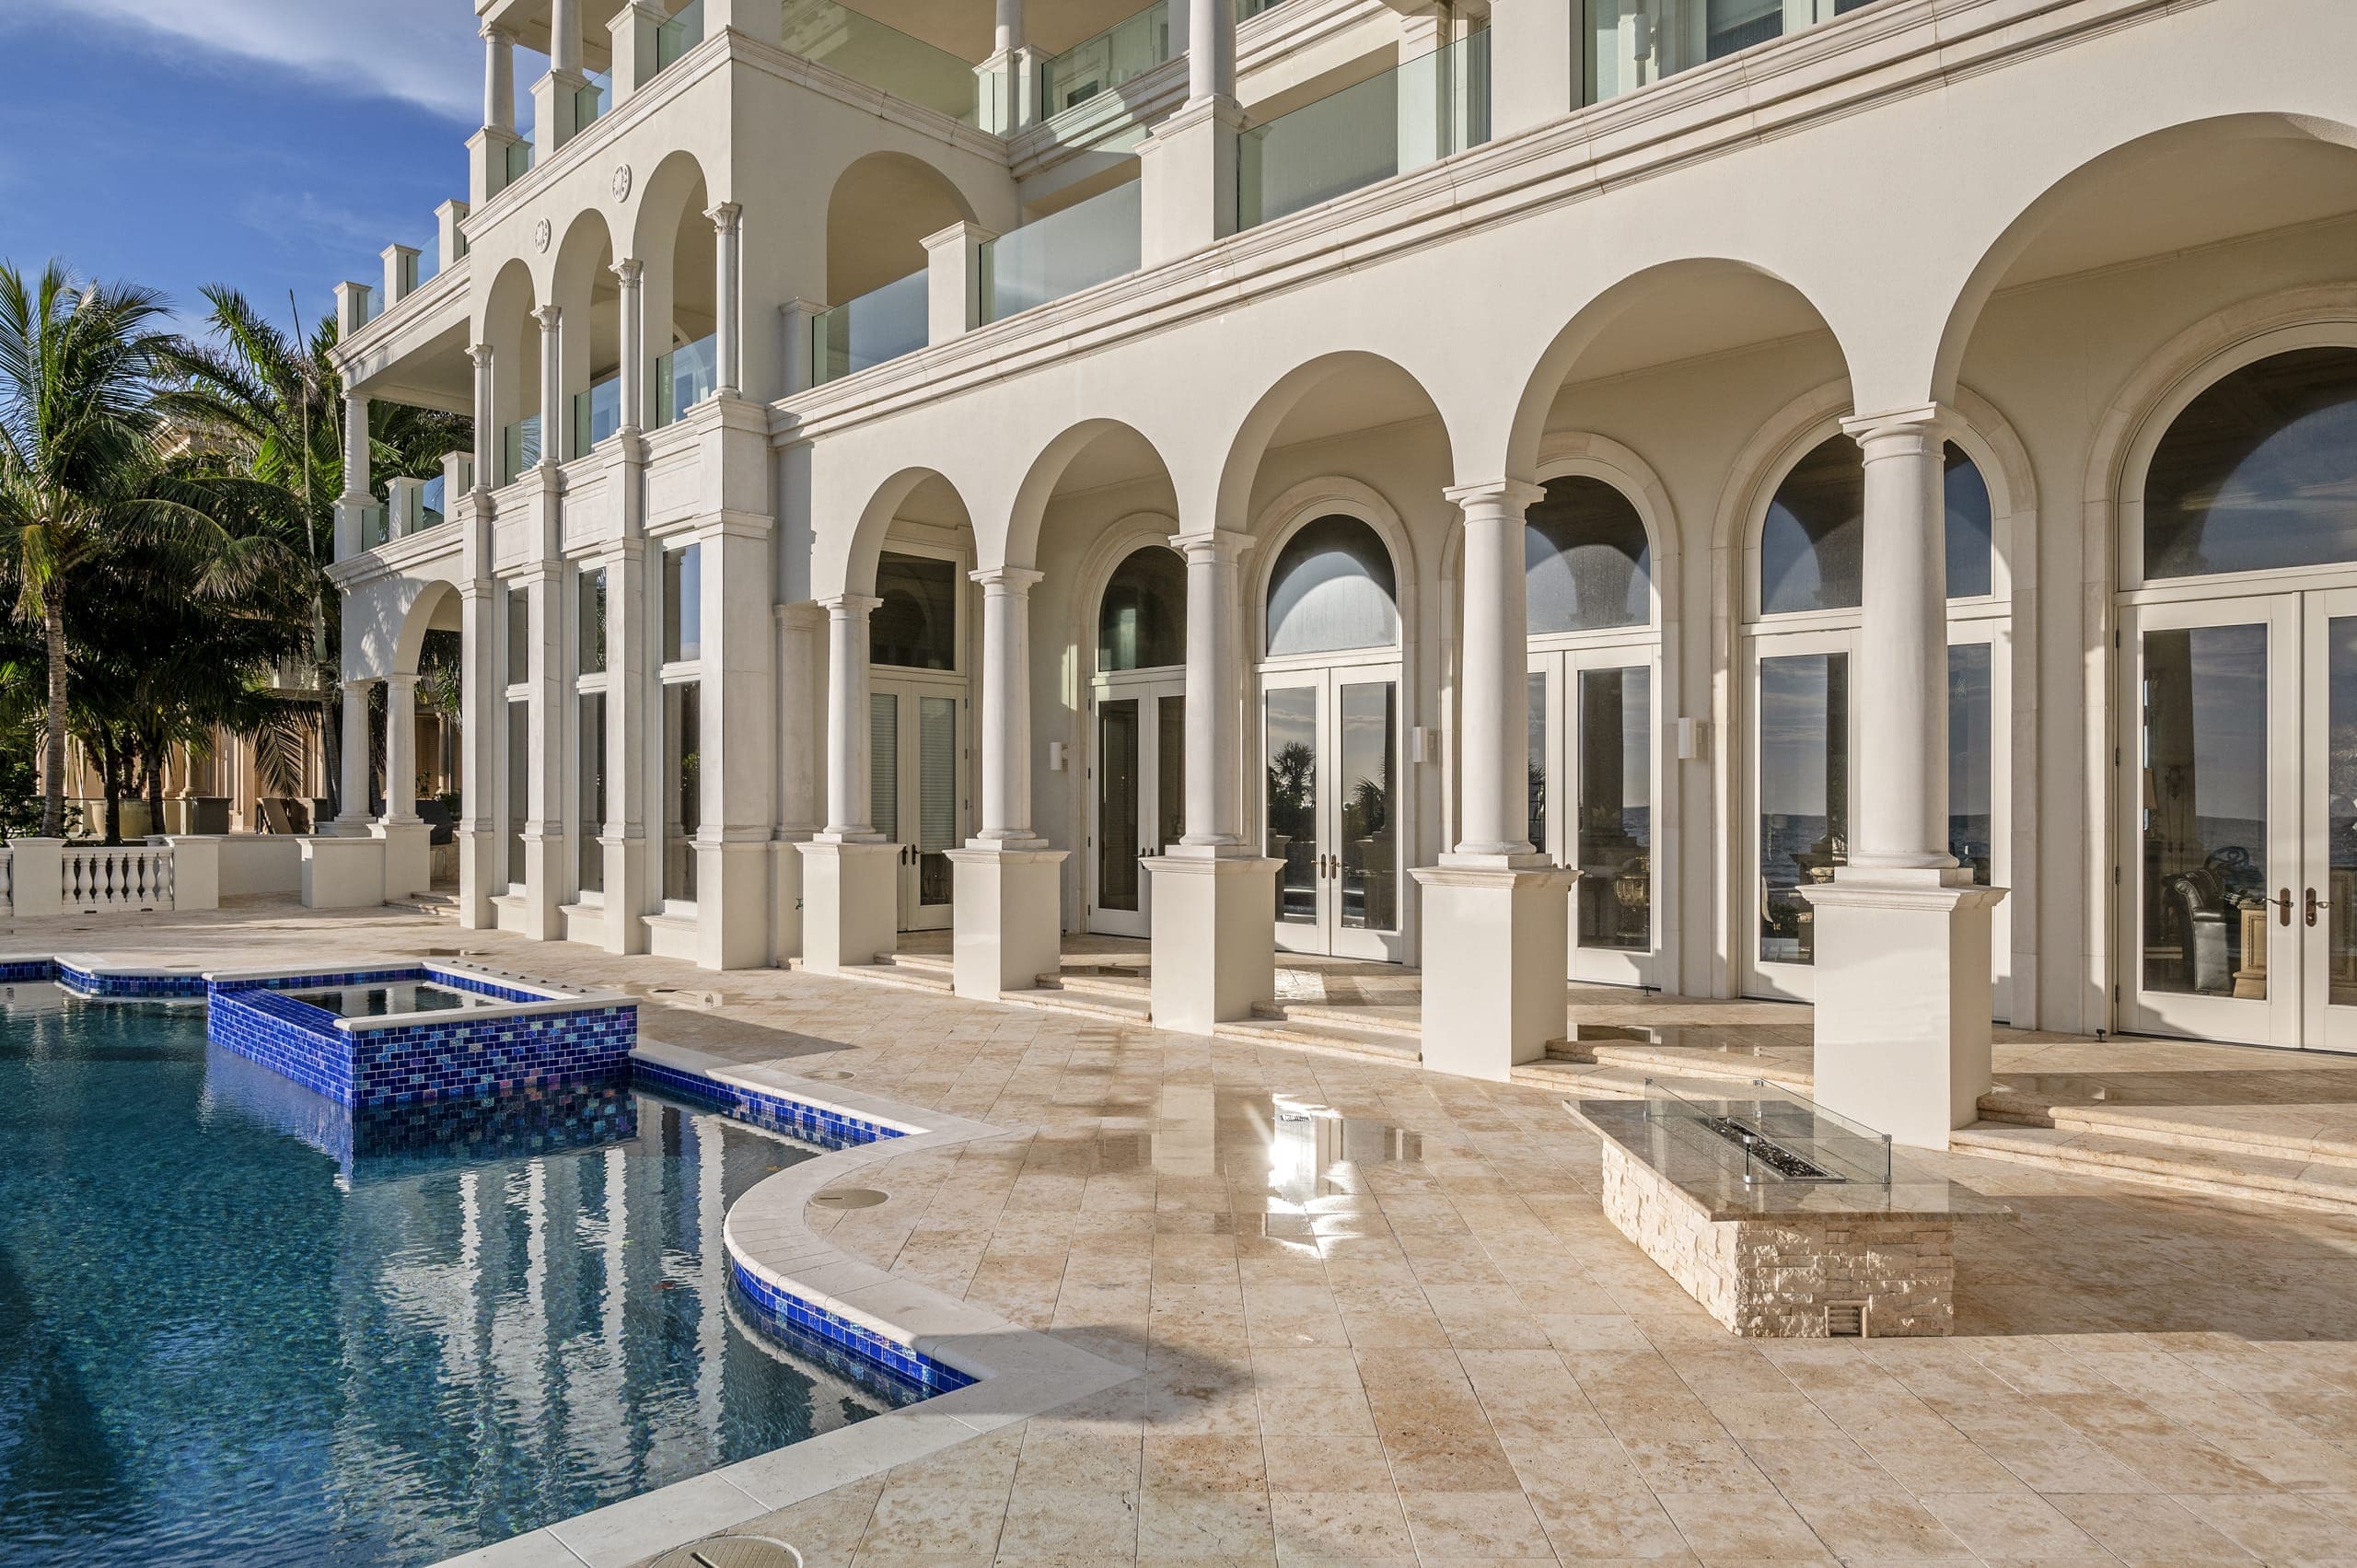 Venetian Architecture Rear Exterior Pool Arches And Columns